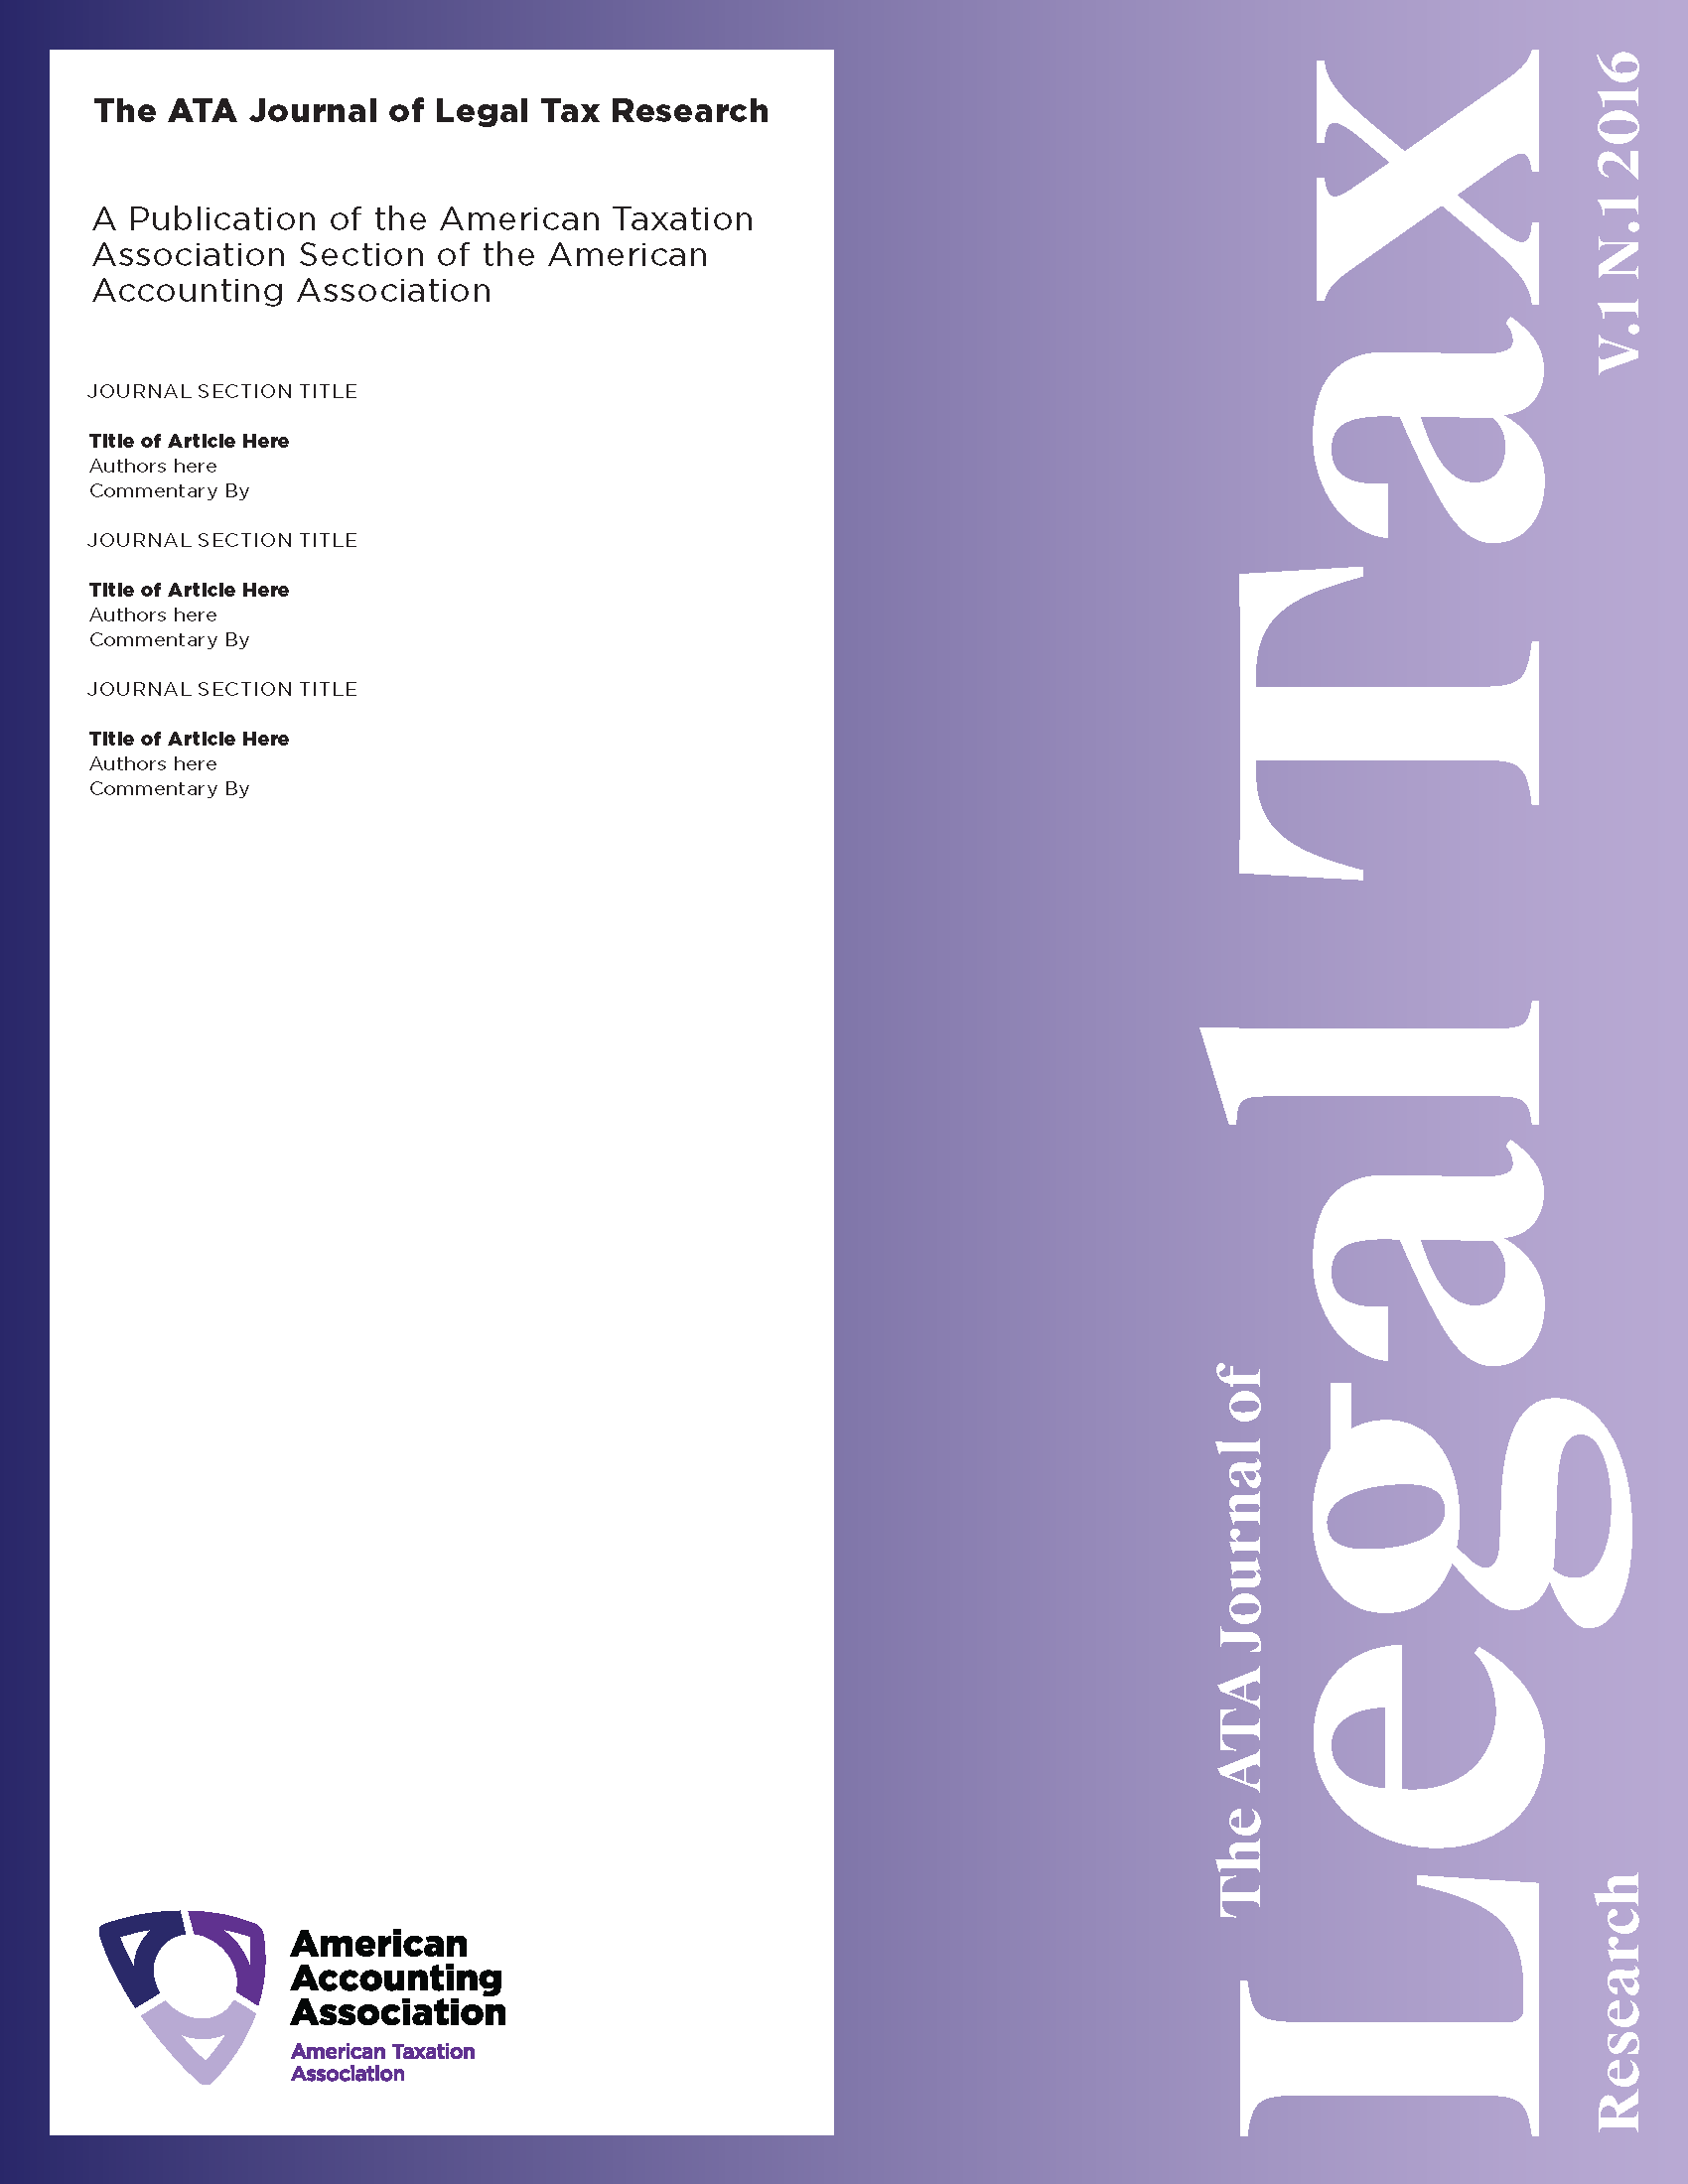 The ATA Journal of Legal Tax Research